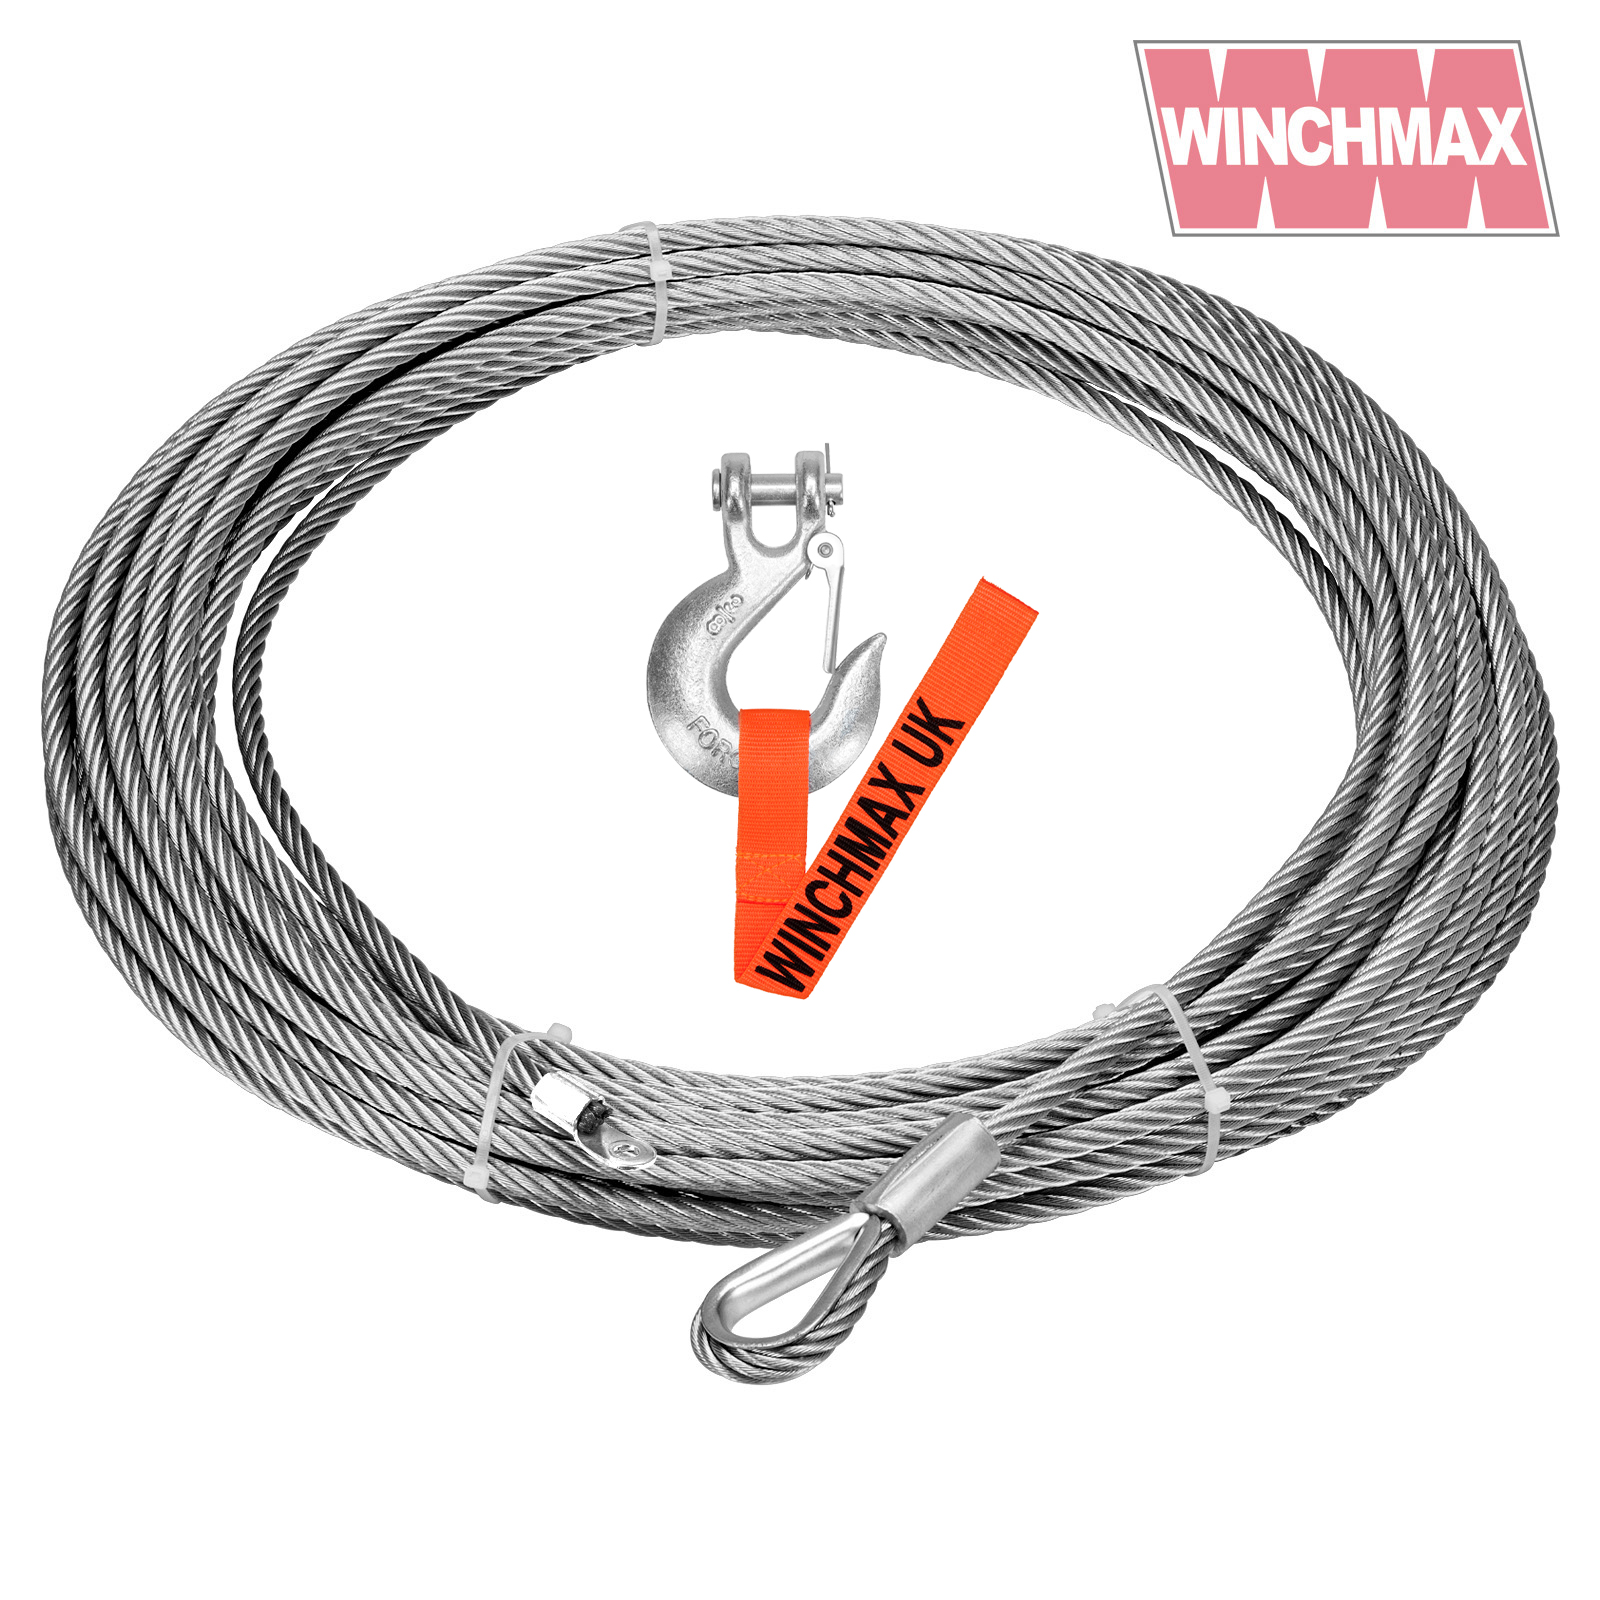 Winchmax 26x10 Wire Rope